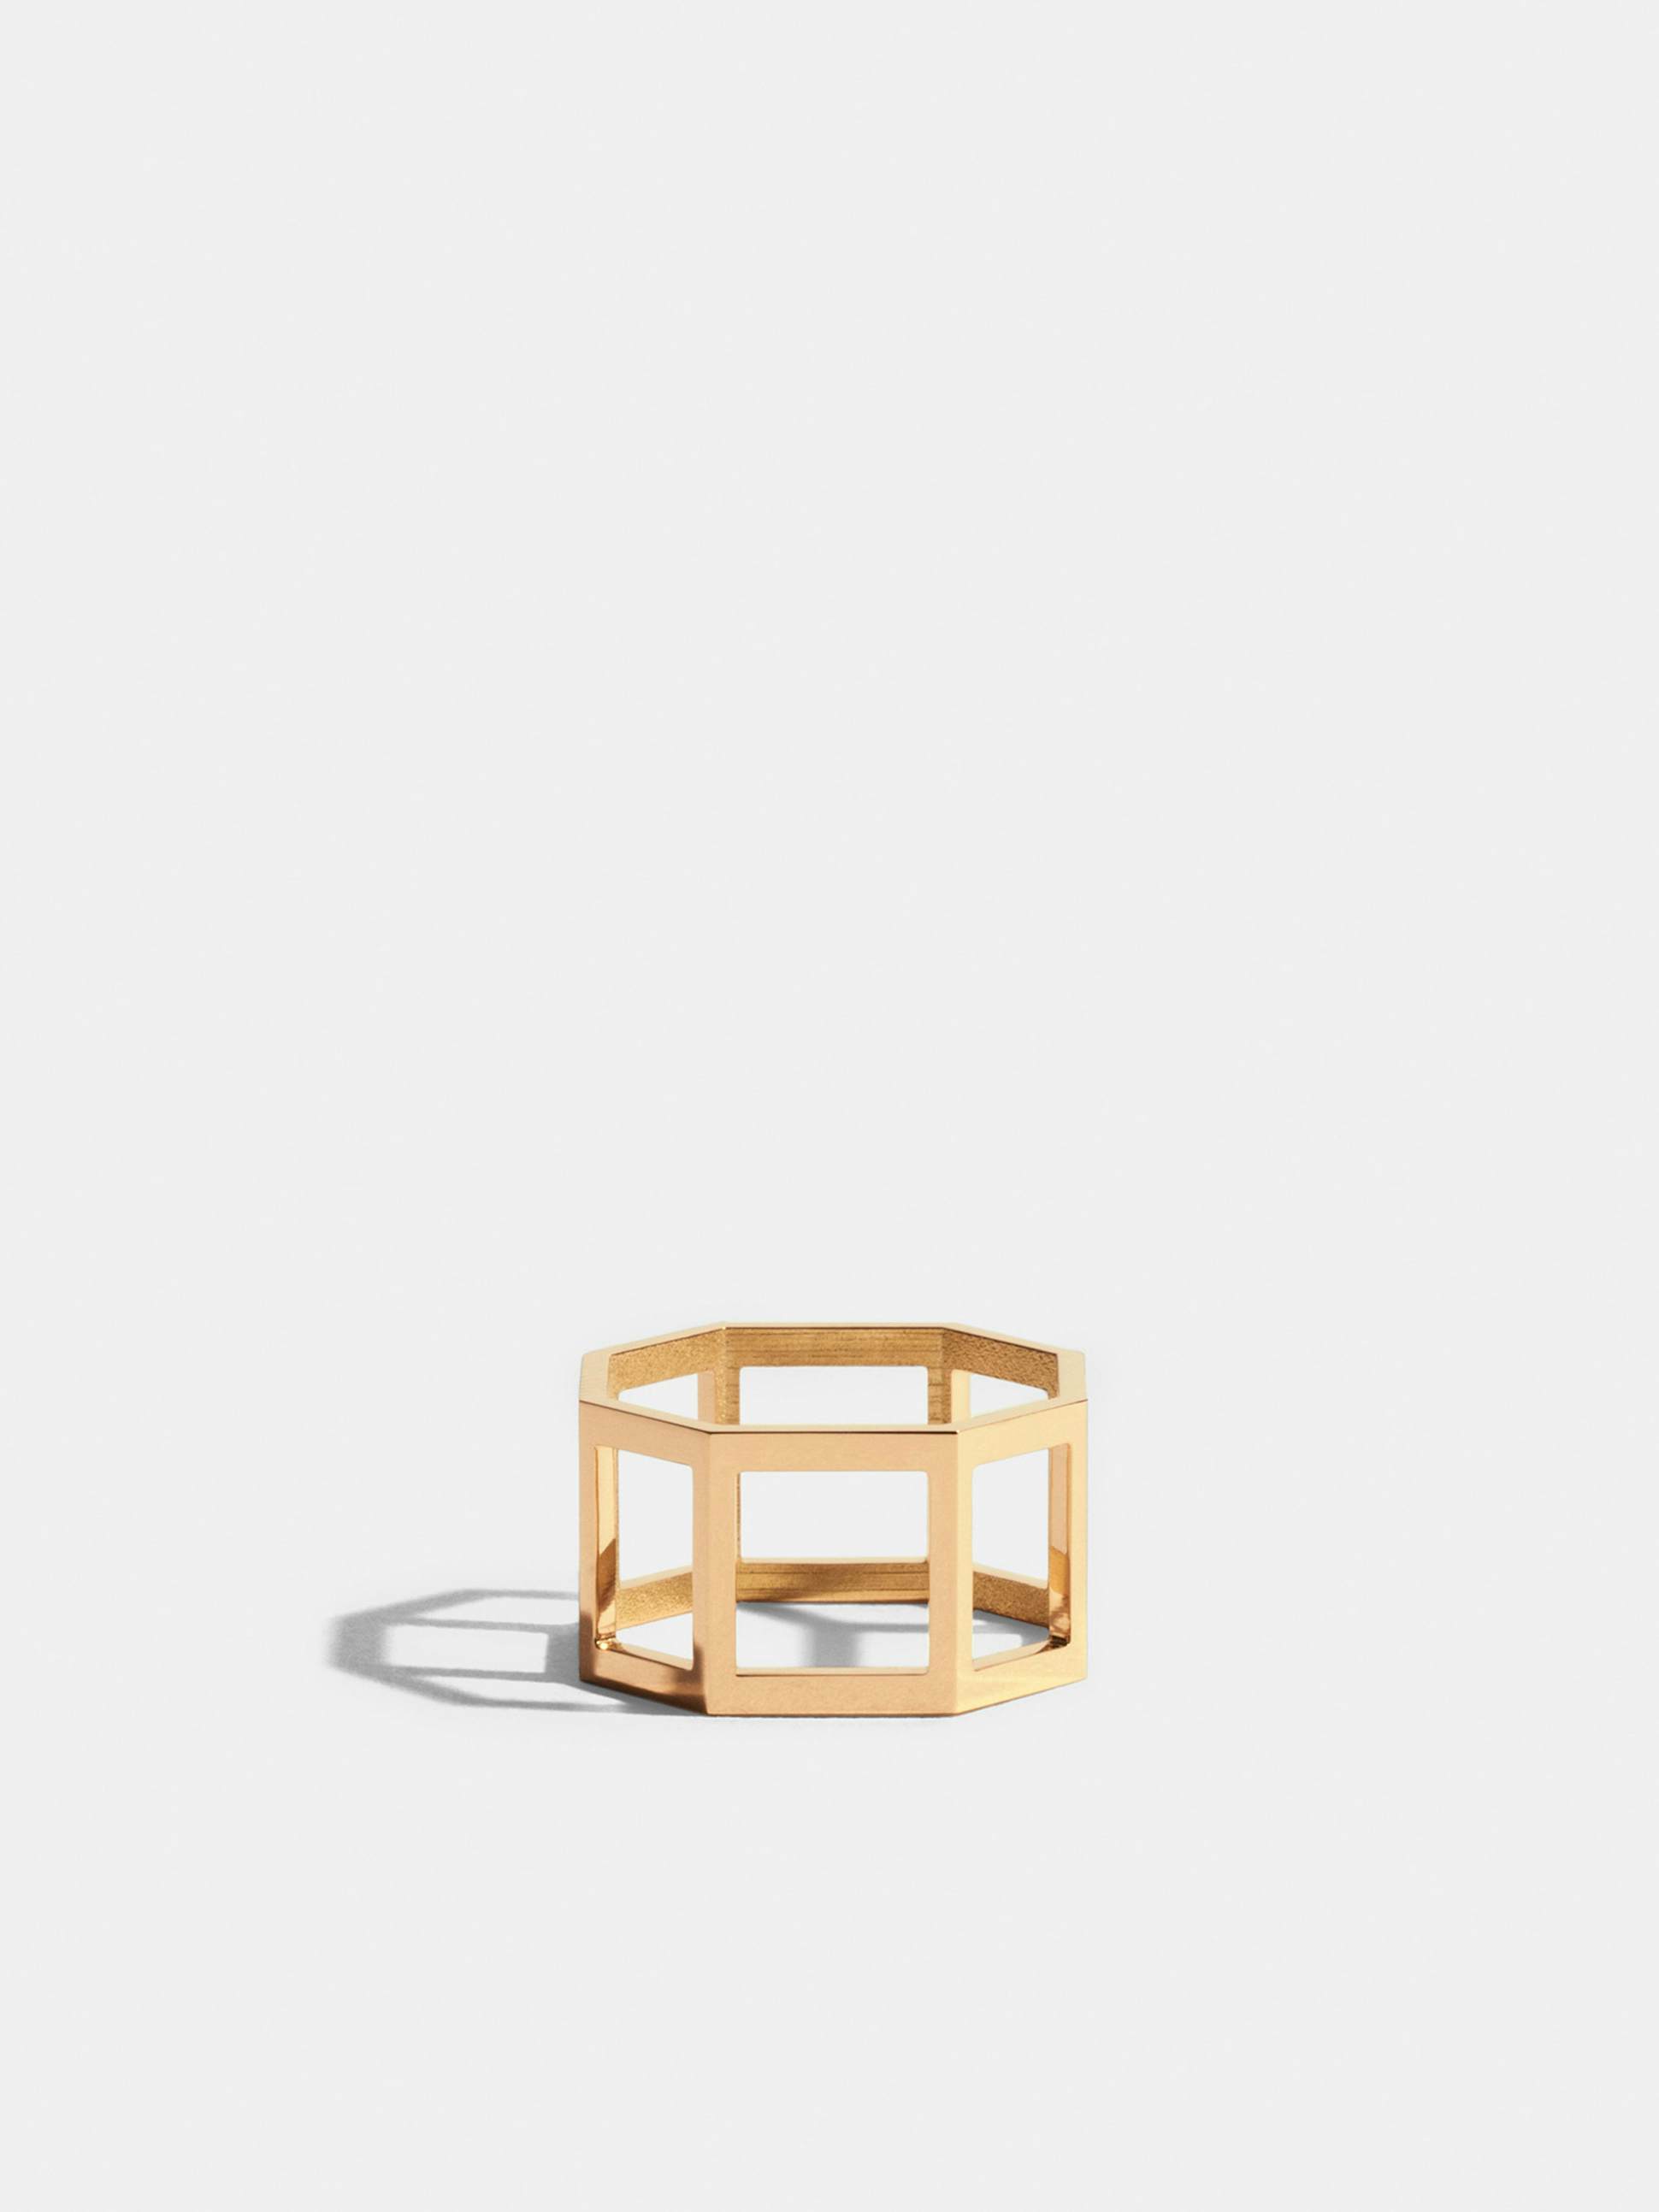 Octogone structured ring in 18k Fairmined ethical yellow gold (11mm)